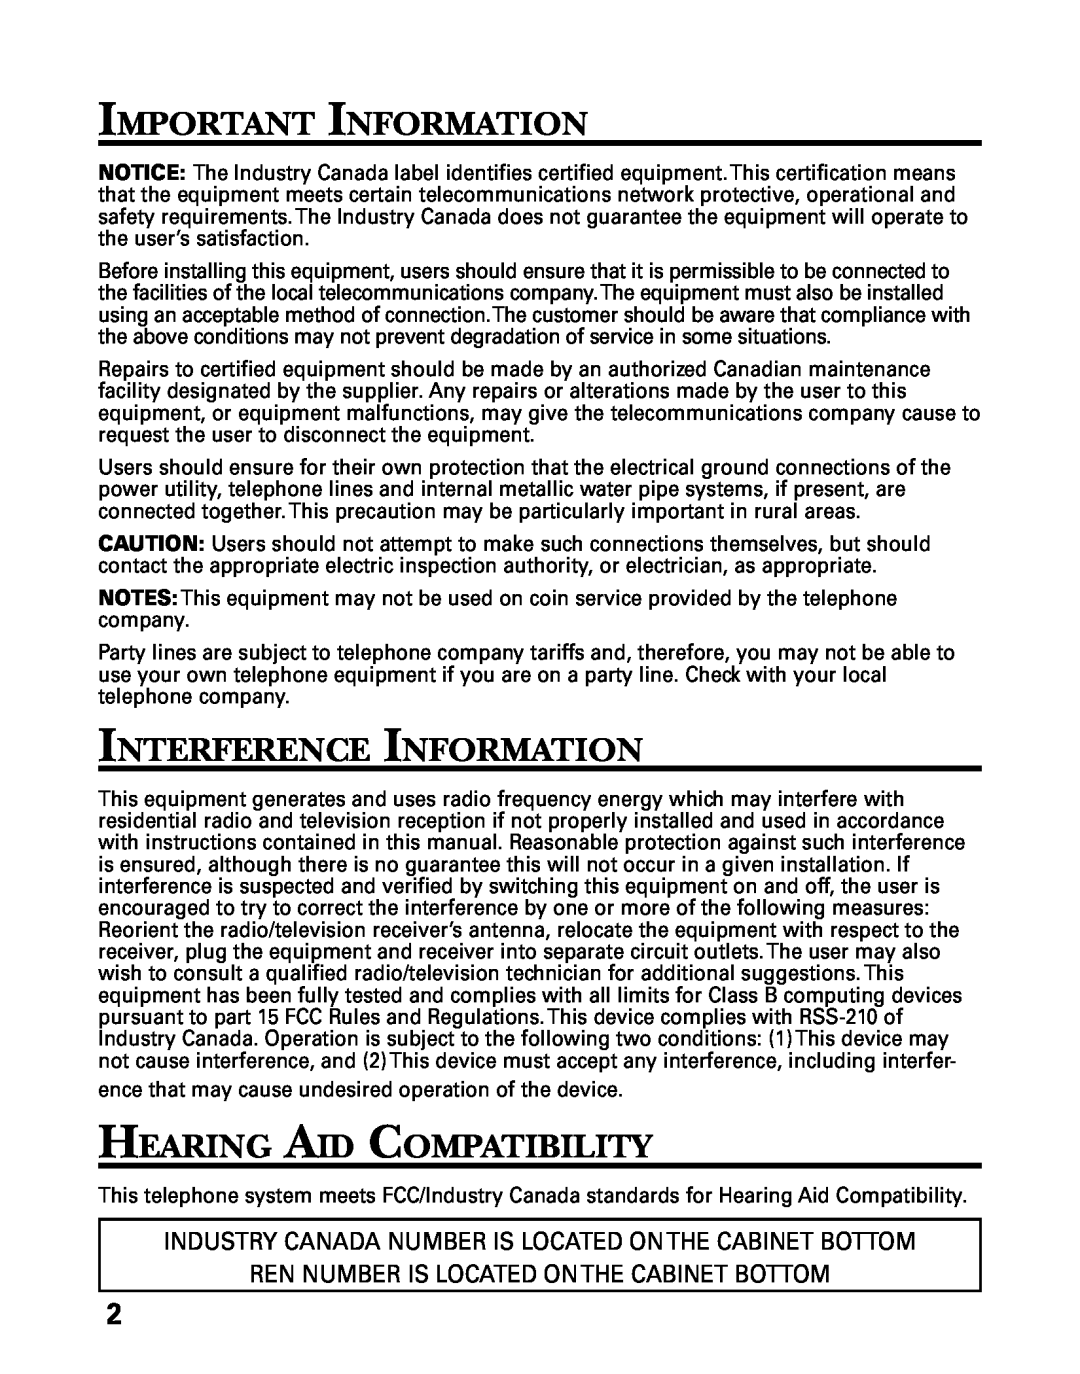 GE 27730 manual Important Information, Interference Information, Hearing Aid Compatibility 